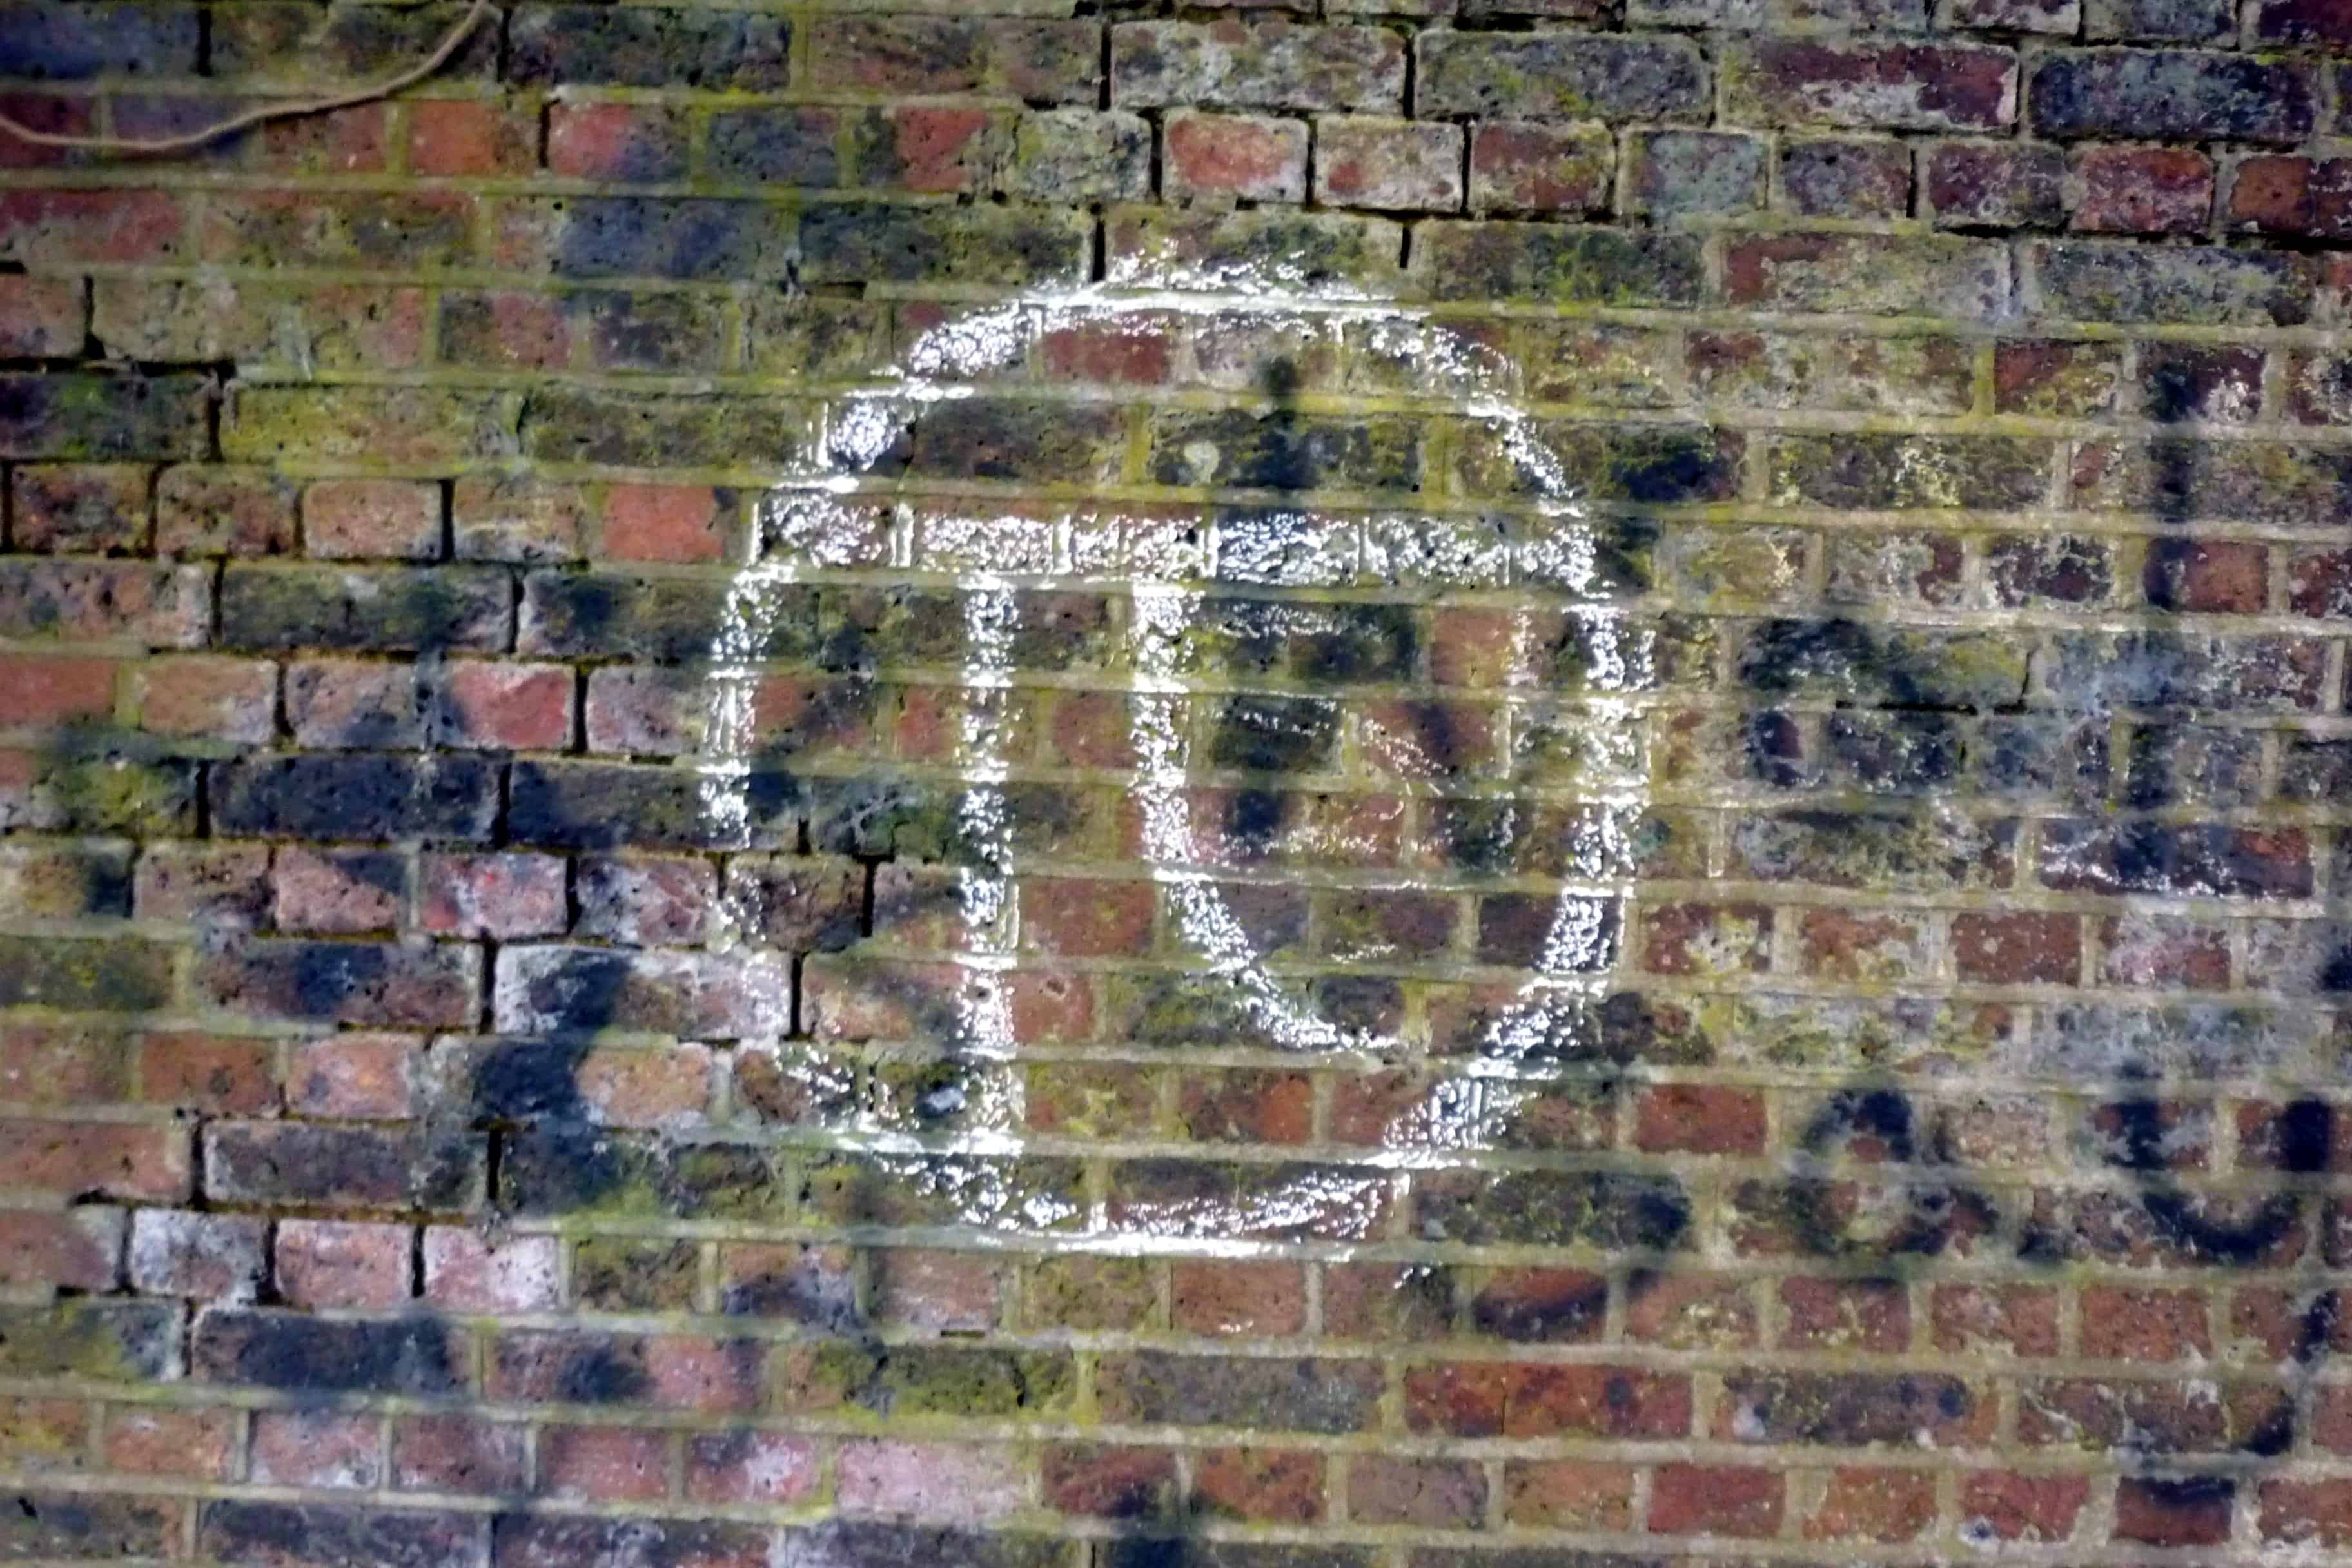 The pi symbol graffitied on a wall in London.